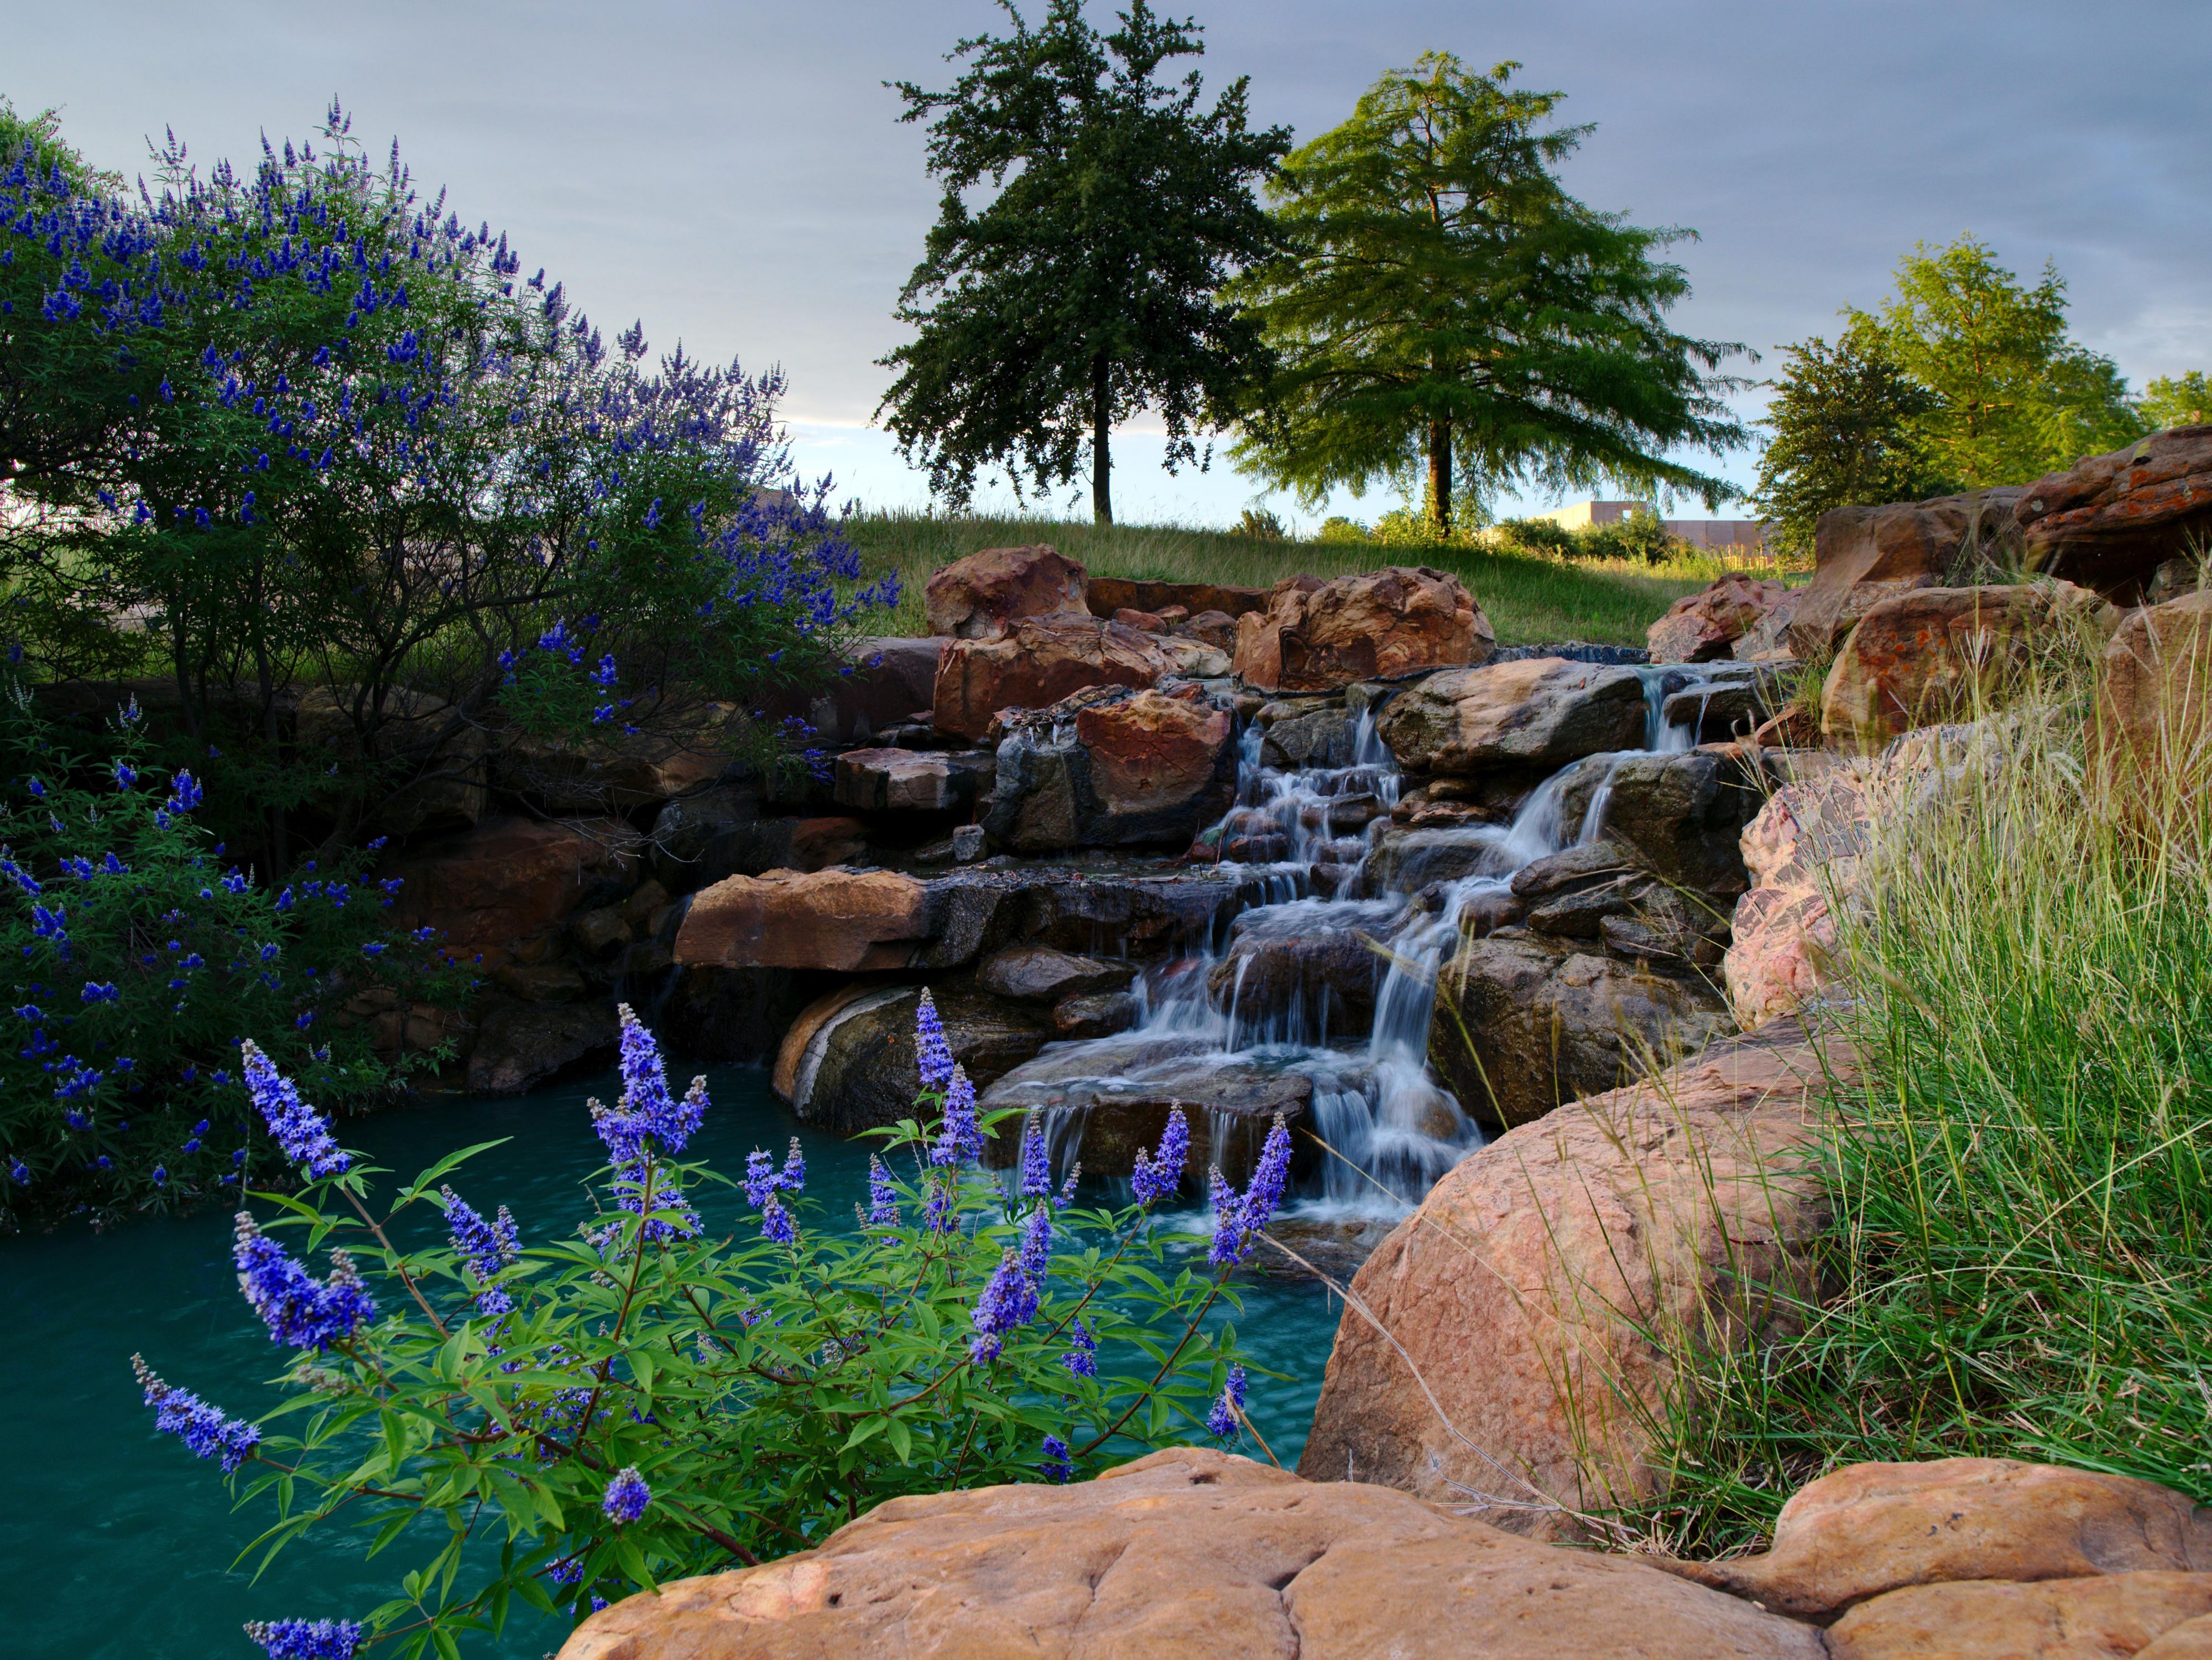 Explore nearby parks just minutes from our Frisco hotel